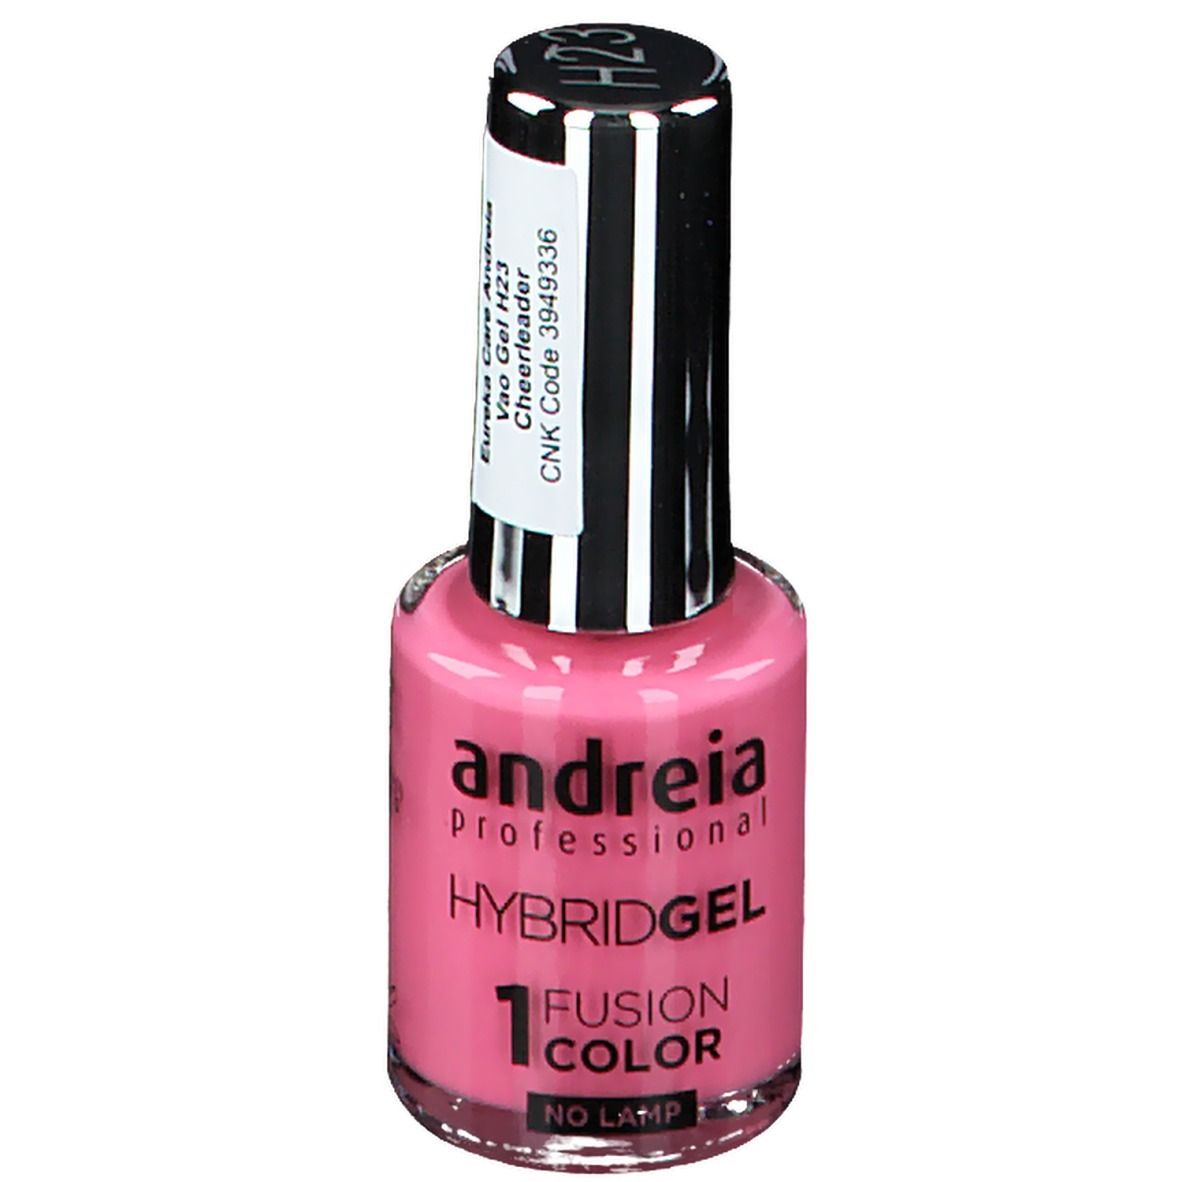 Image of Andreia professional Gel Andrea Hybrid - Fusion Farbe H23 Cheerleader